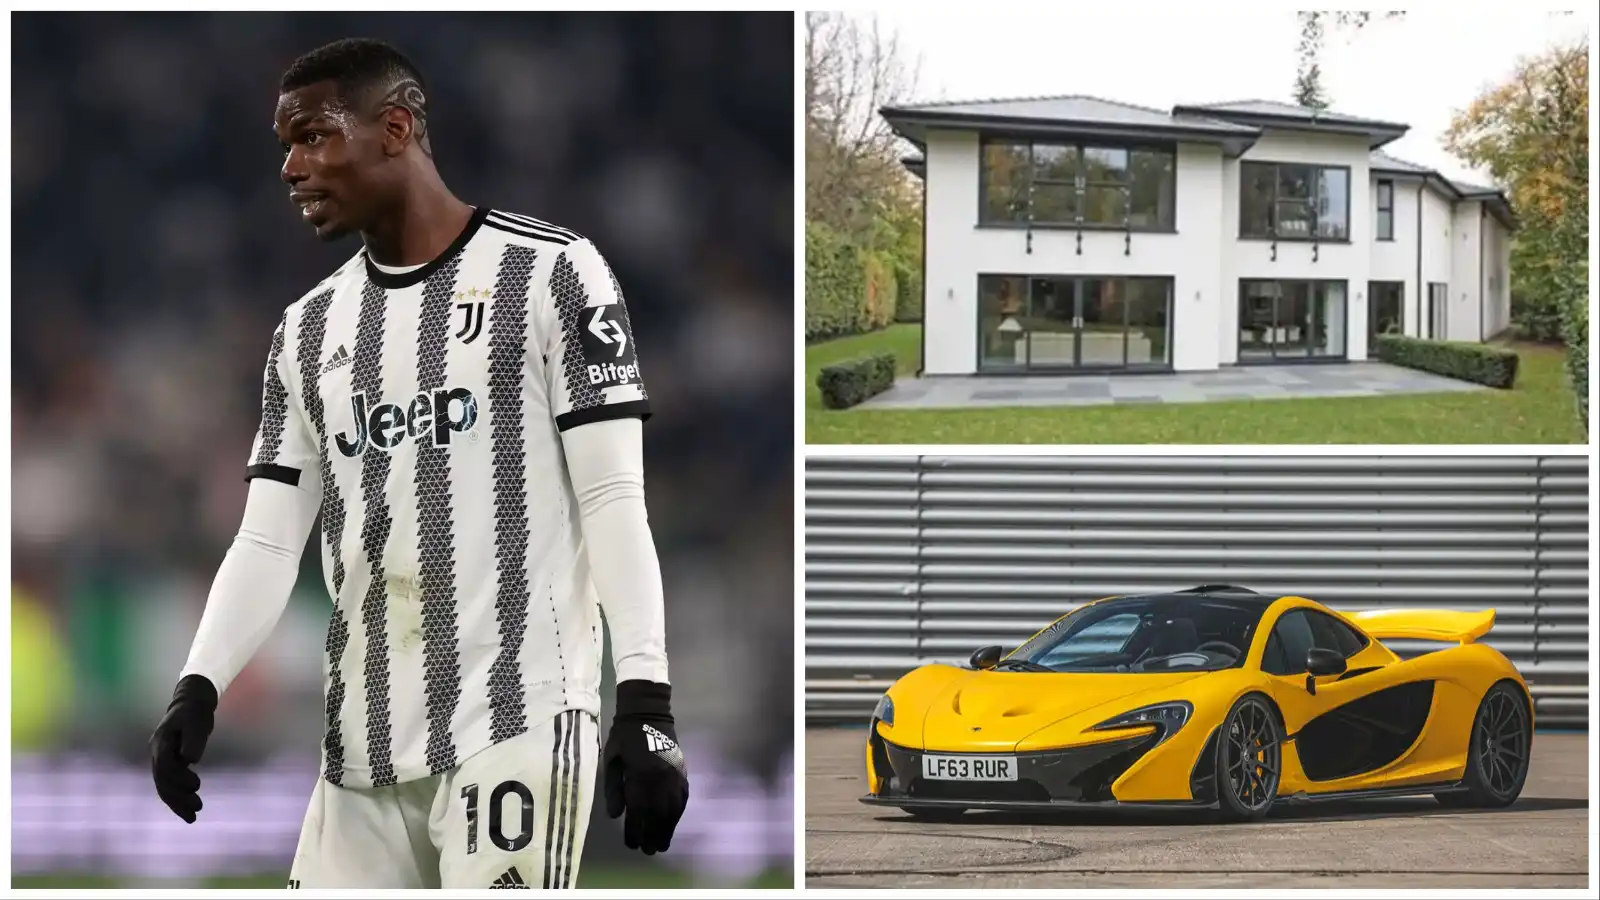 Paul Pogba - Biography, Lifestyle, Family, Wife, Kids, House, Cars and Net  Worth 2020 